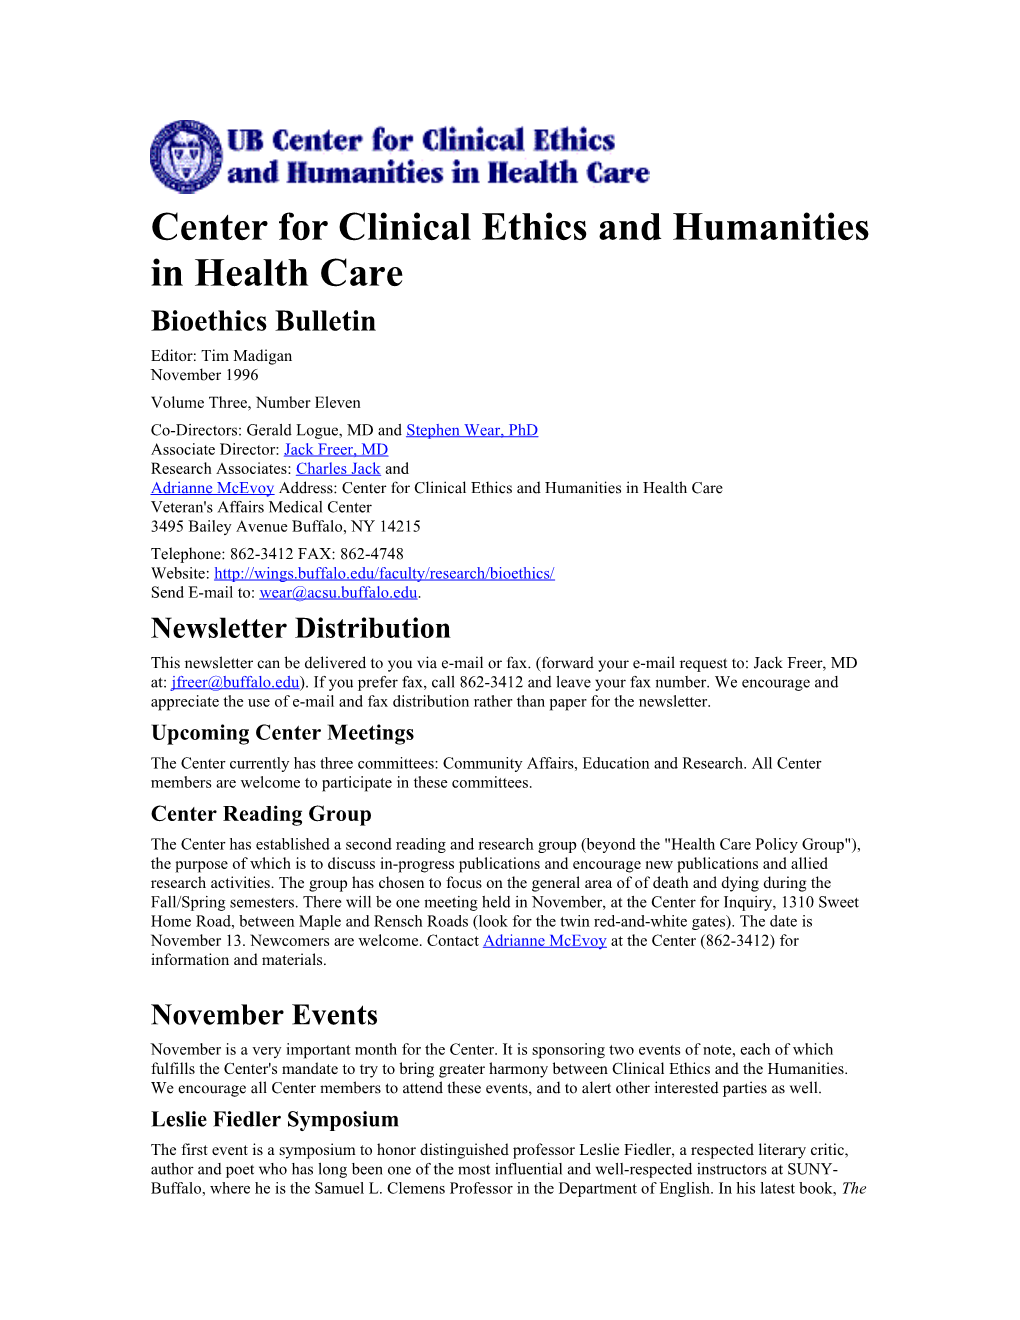 Center for Clinical Ethics and Humanities in Health Care